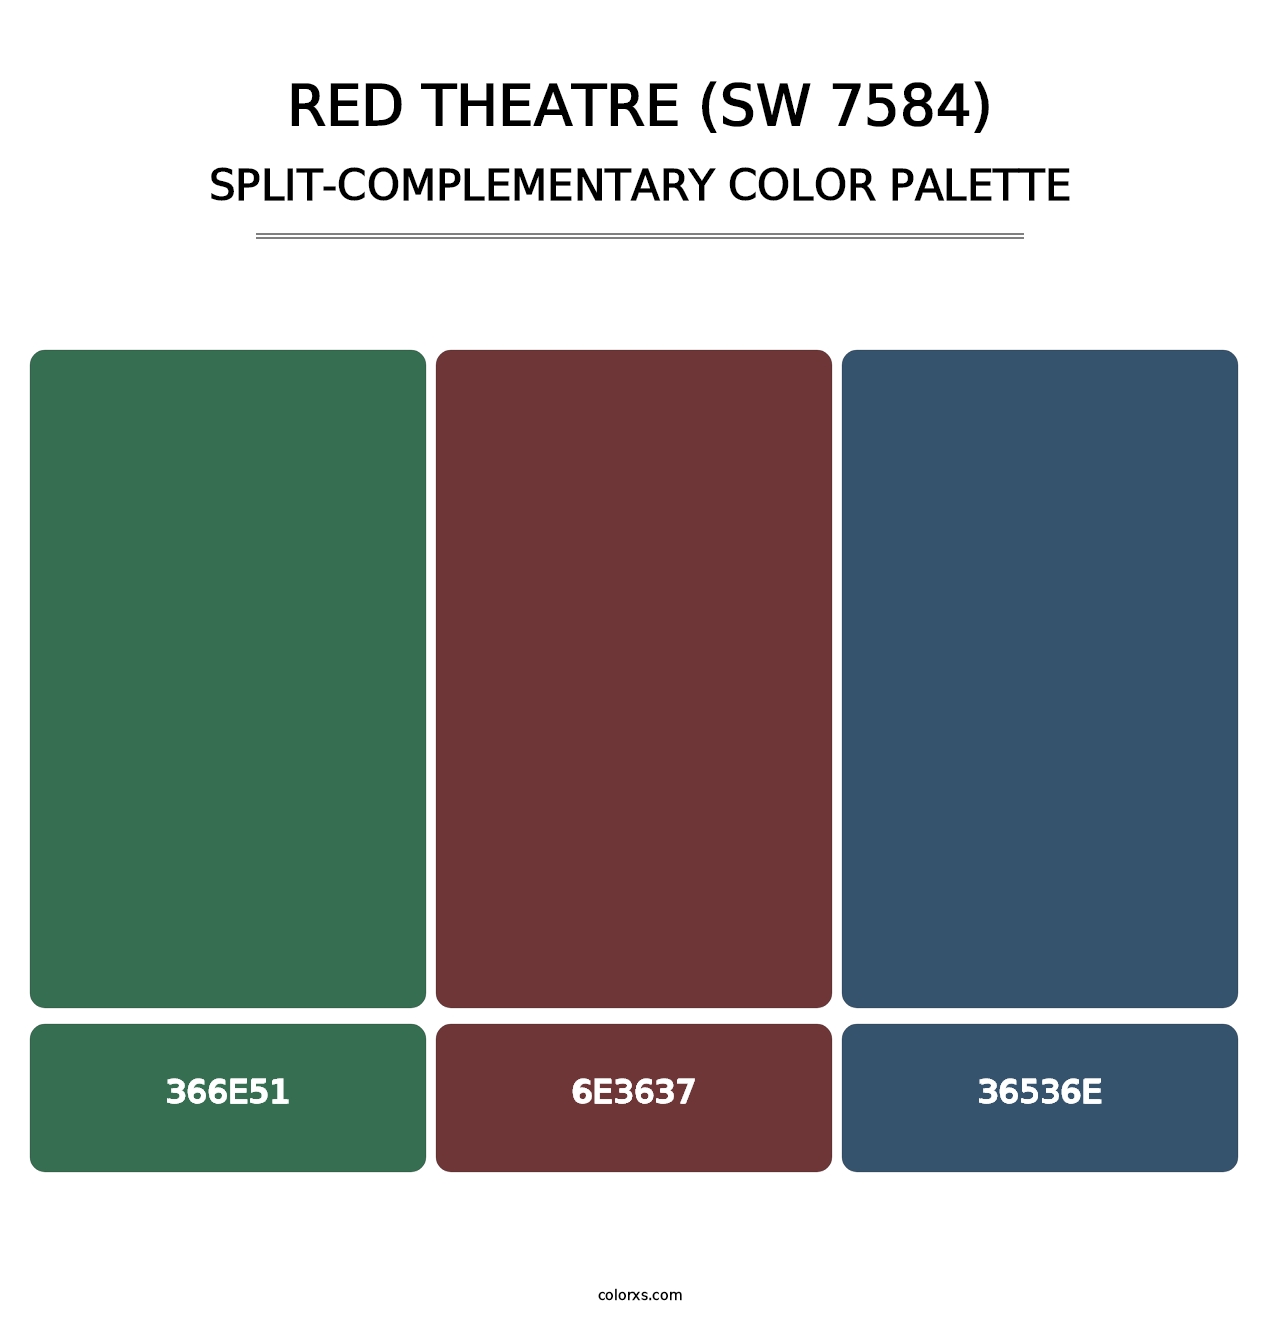 Red Theatre (SW 7584) - Split-Complementary Color Palette